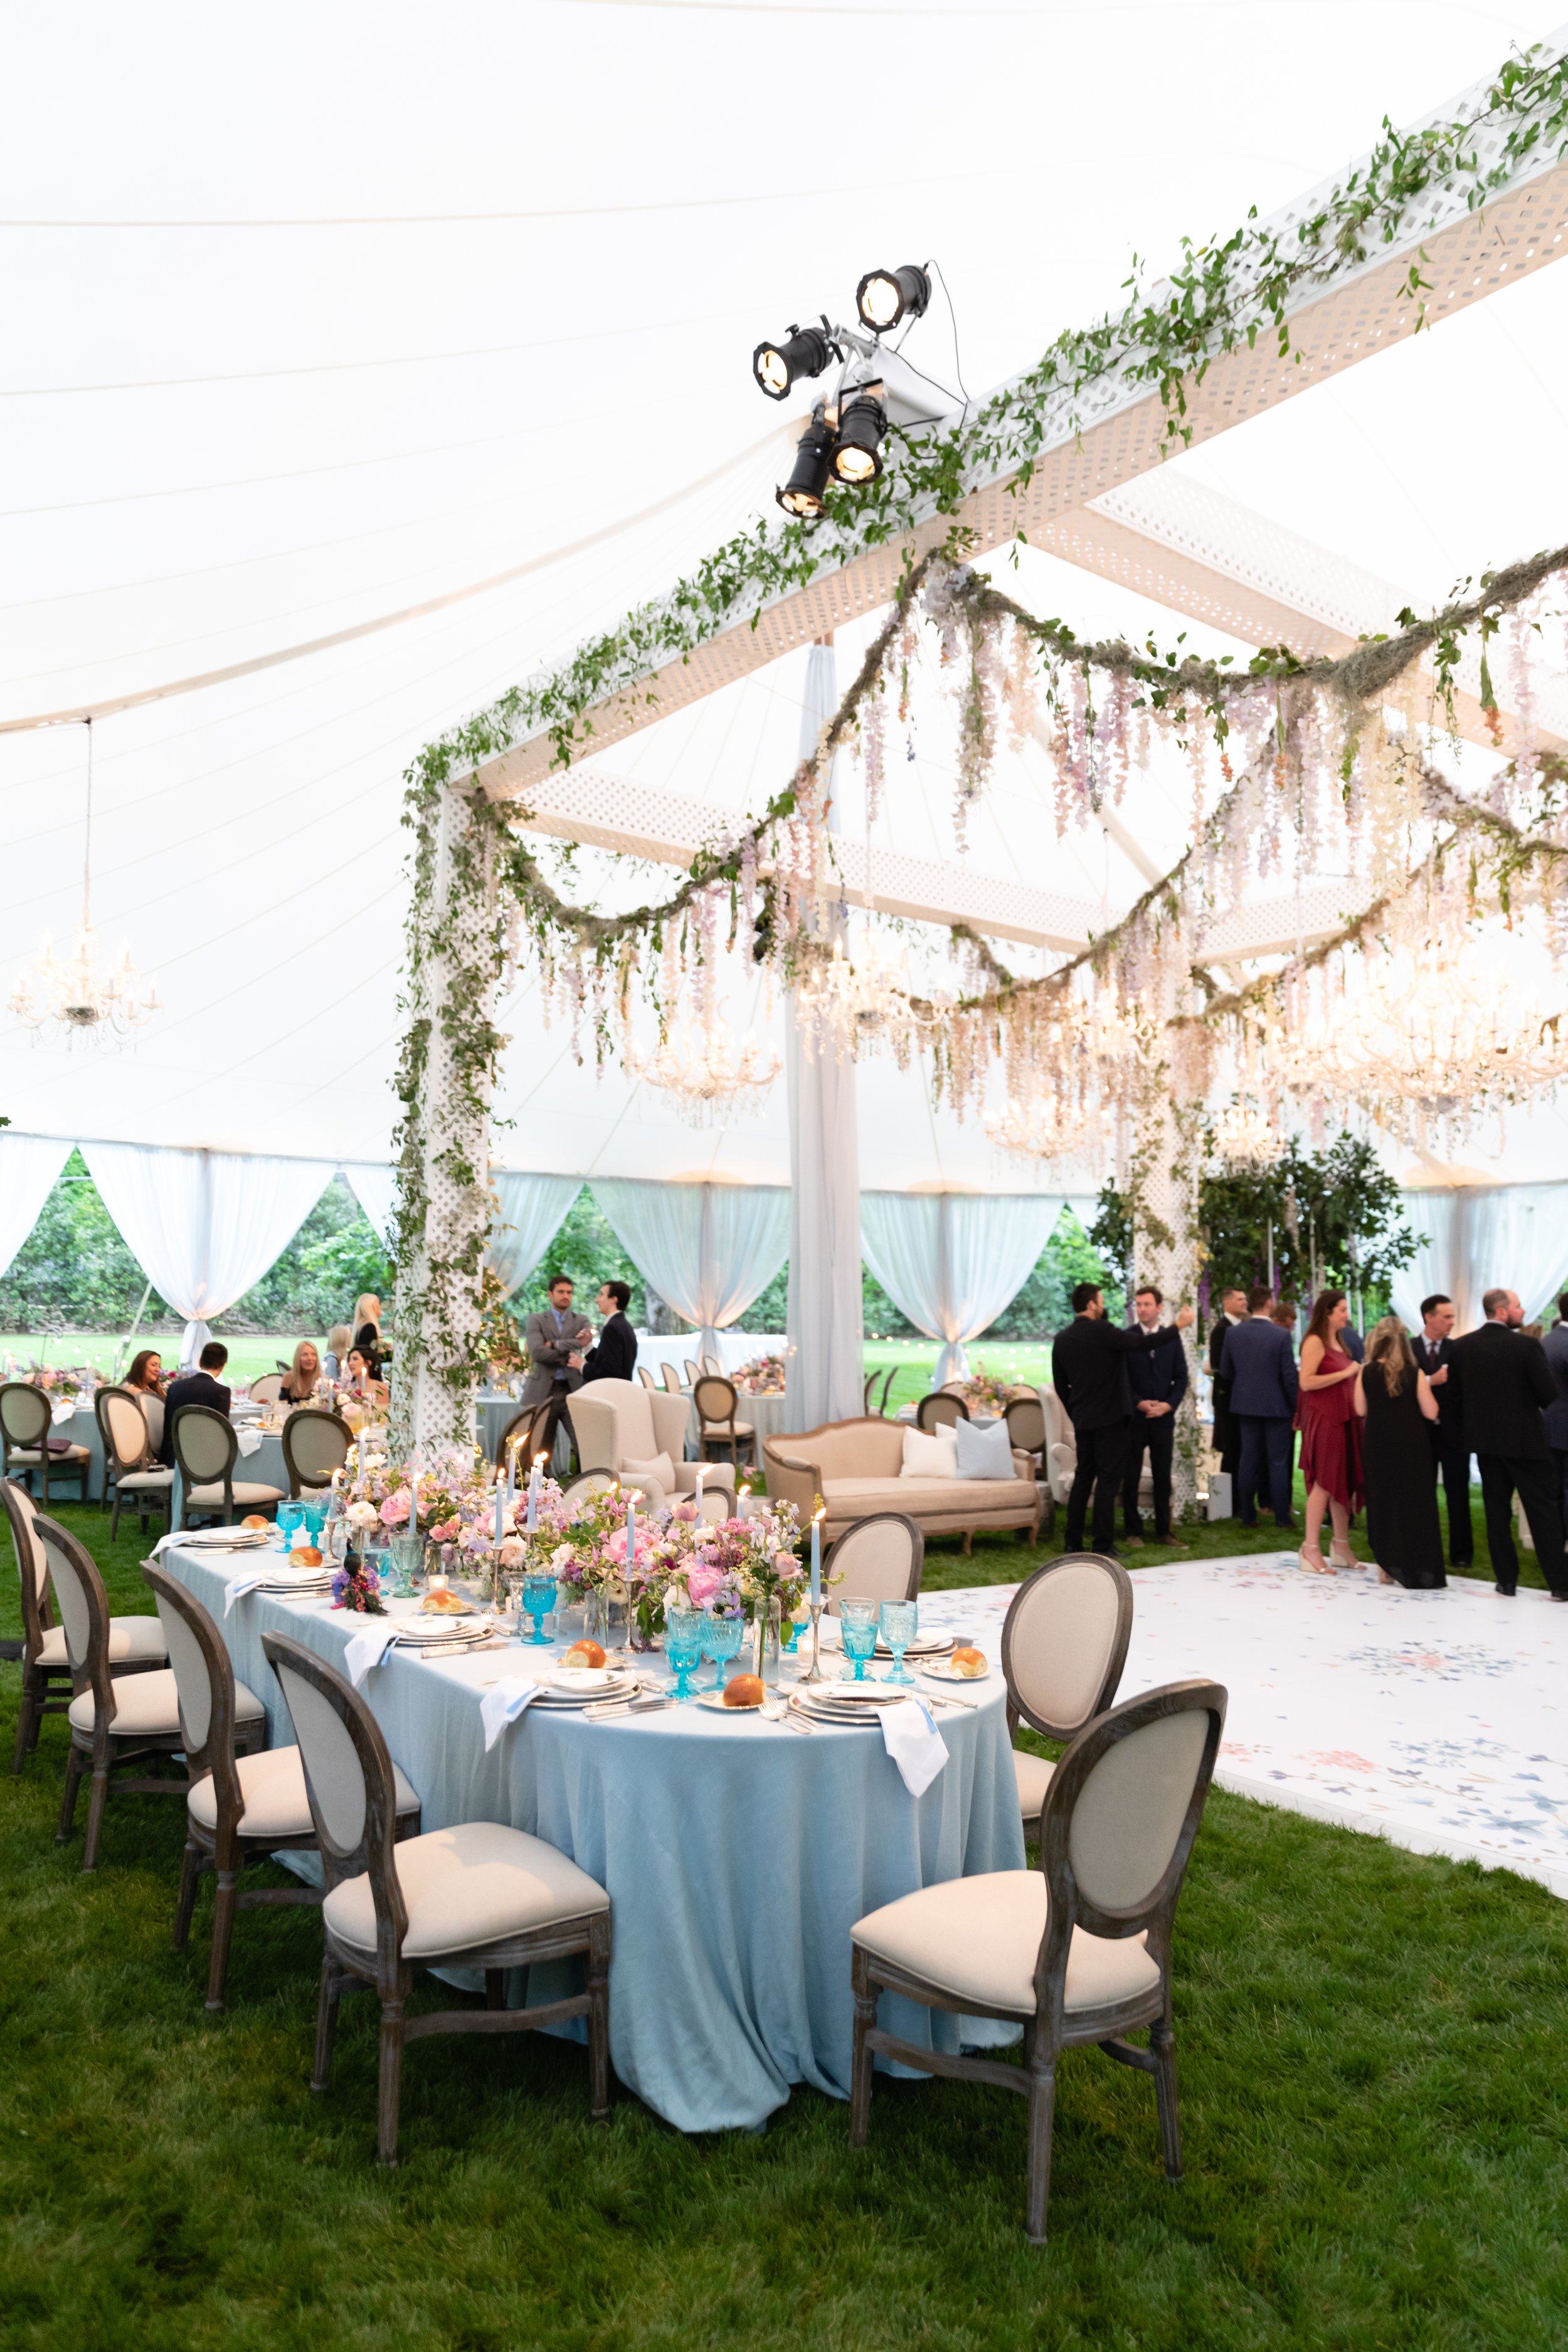 Growing, fresh floral installations with blush garden roses, lavender delphinium, wisteria, globe allium, and vines and greenery for a tented Bridgerton inspired engagement party at a private home in Nashville, TN. Flower by Tennessee based wedding f